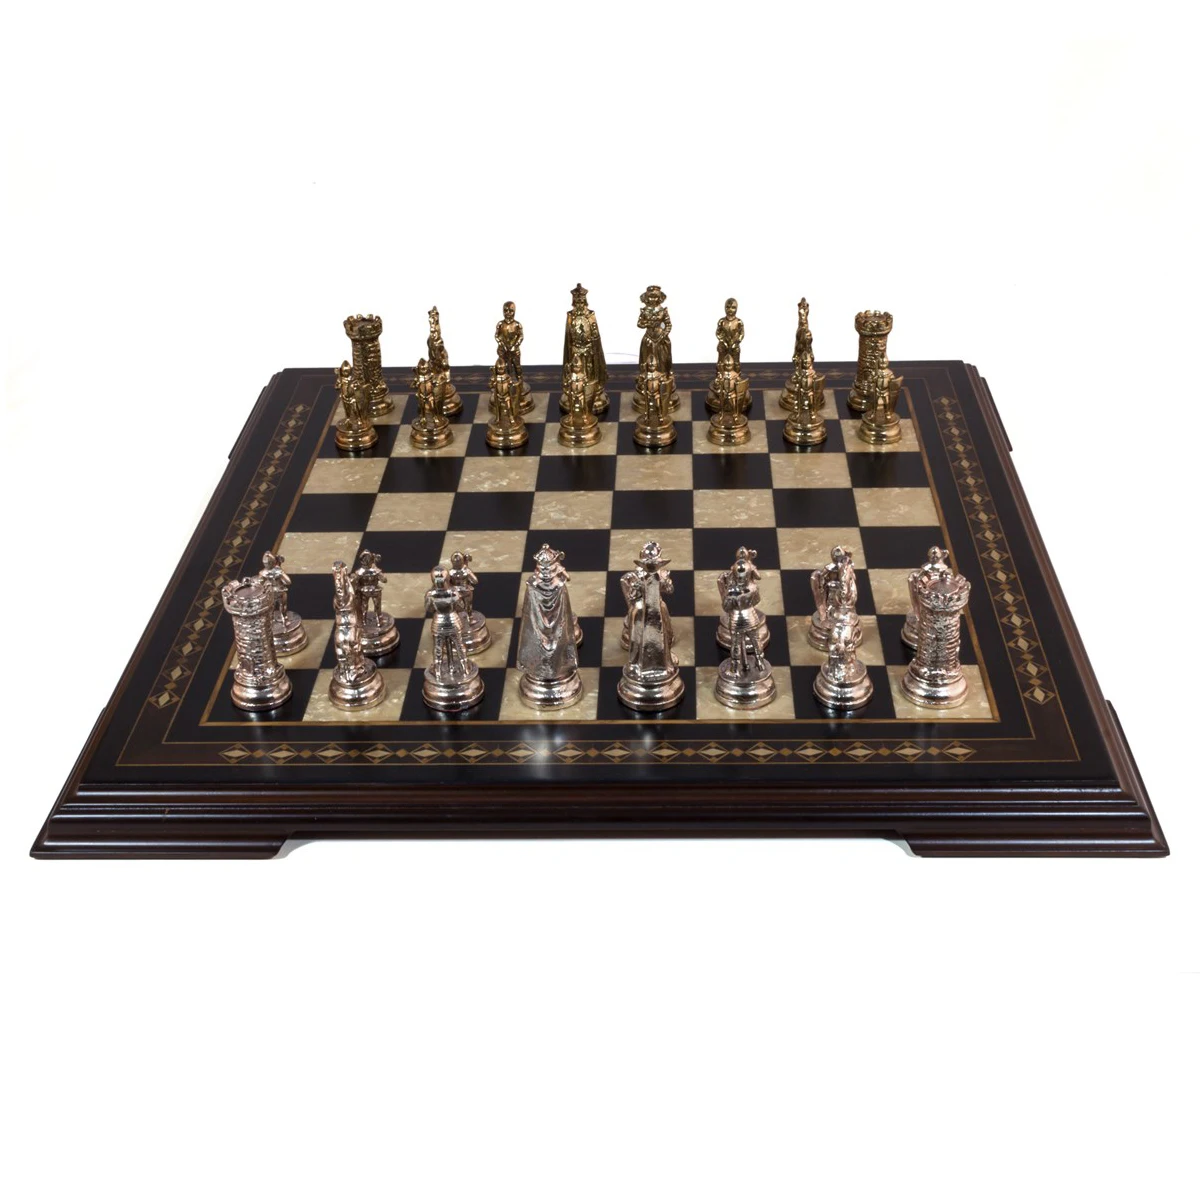 22.5'' Flat Footed Black Chessboard - Solid Beech Wood Mosaic Engraved Chess Board Game Gift Items Deck Box Checkers Шахматы 16 5 flat footed rose chessboard solid beech wood mosaic engraved chess board game gift items deck box checkers шахматы